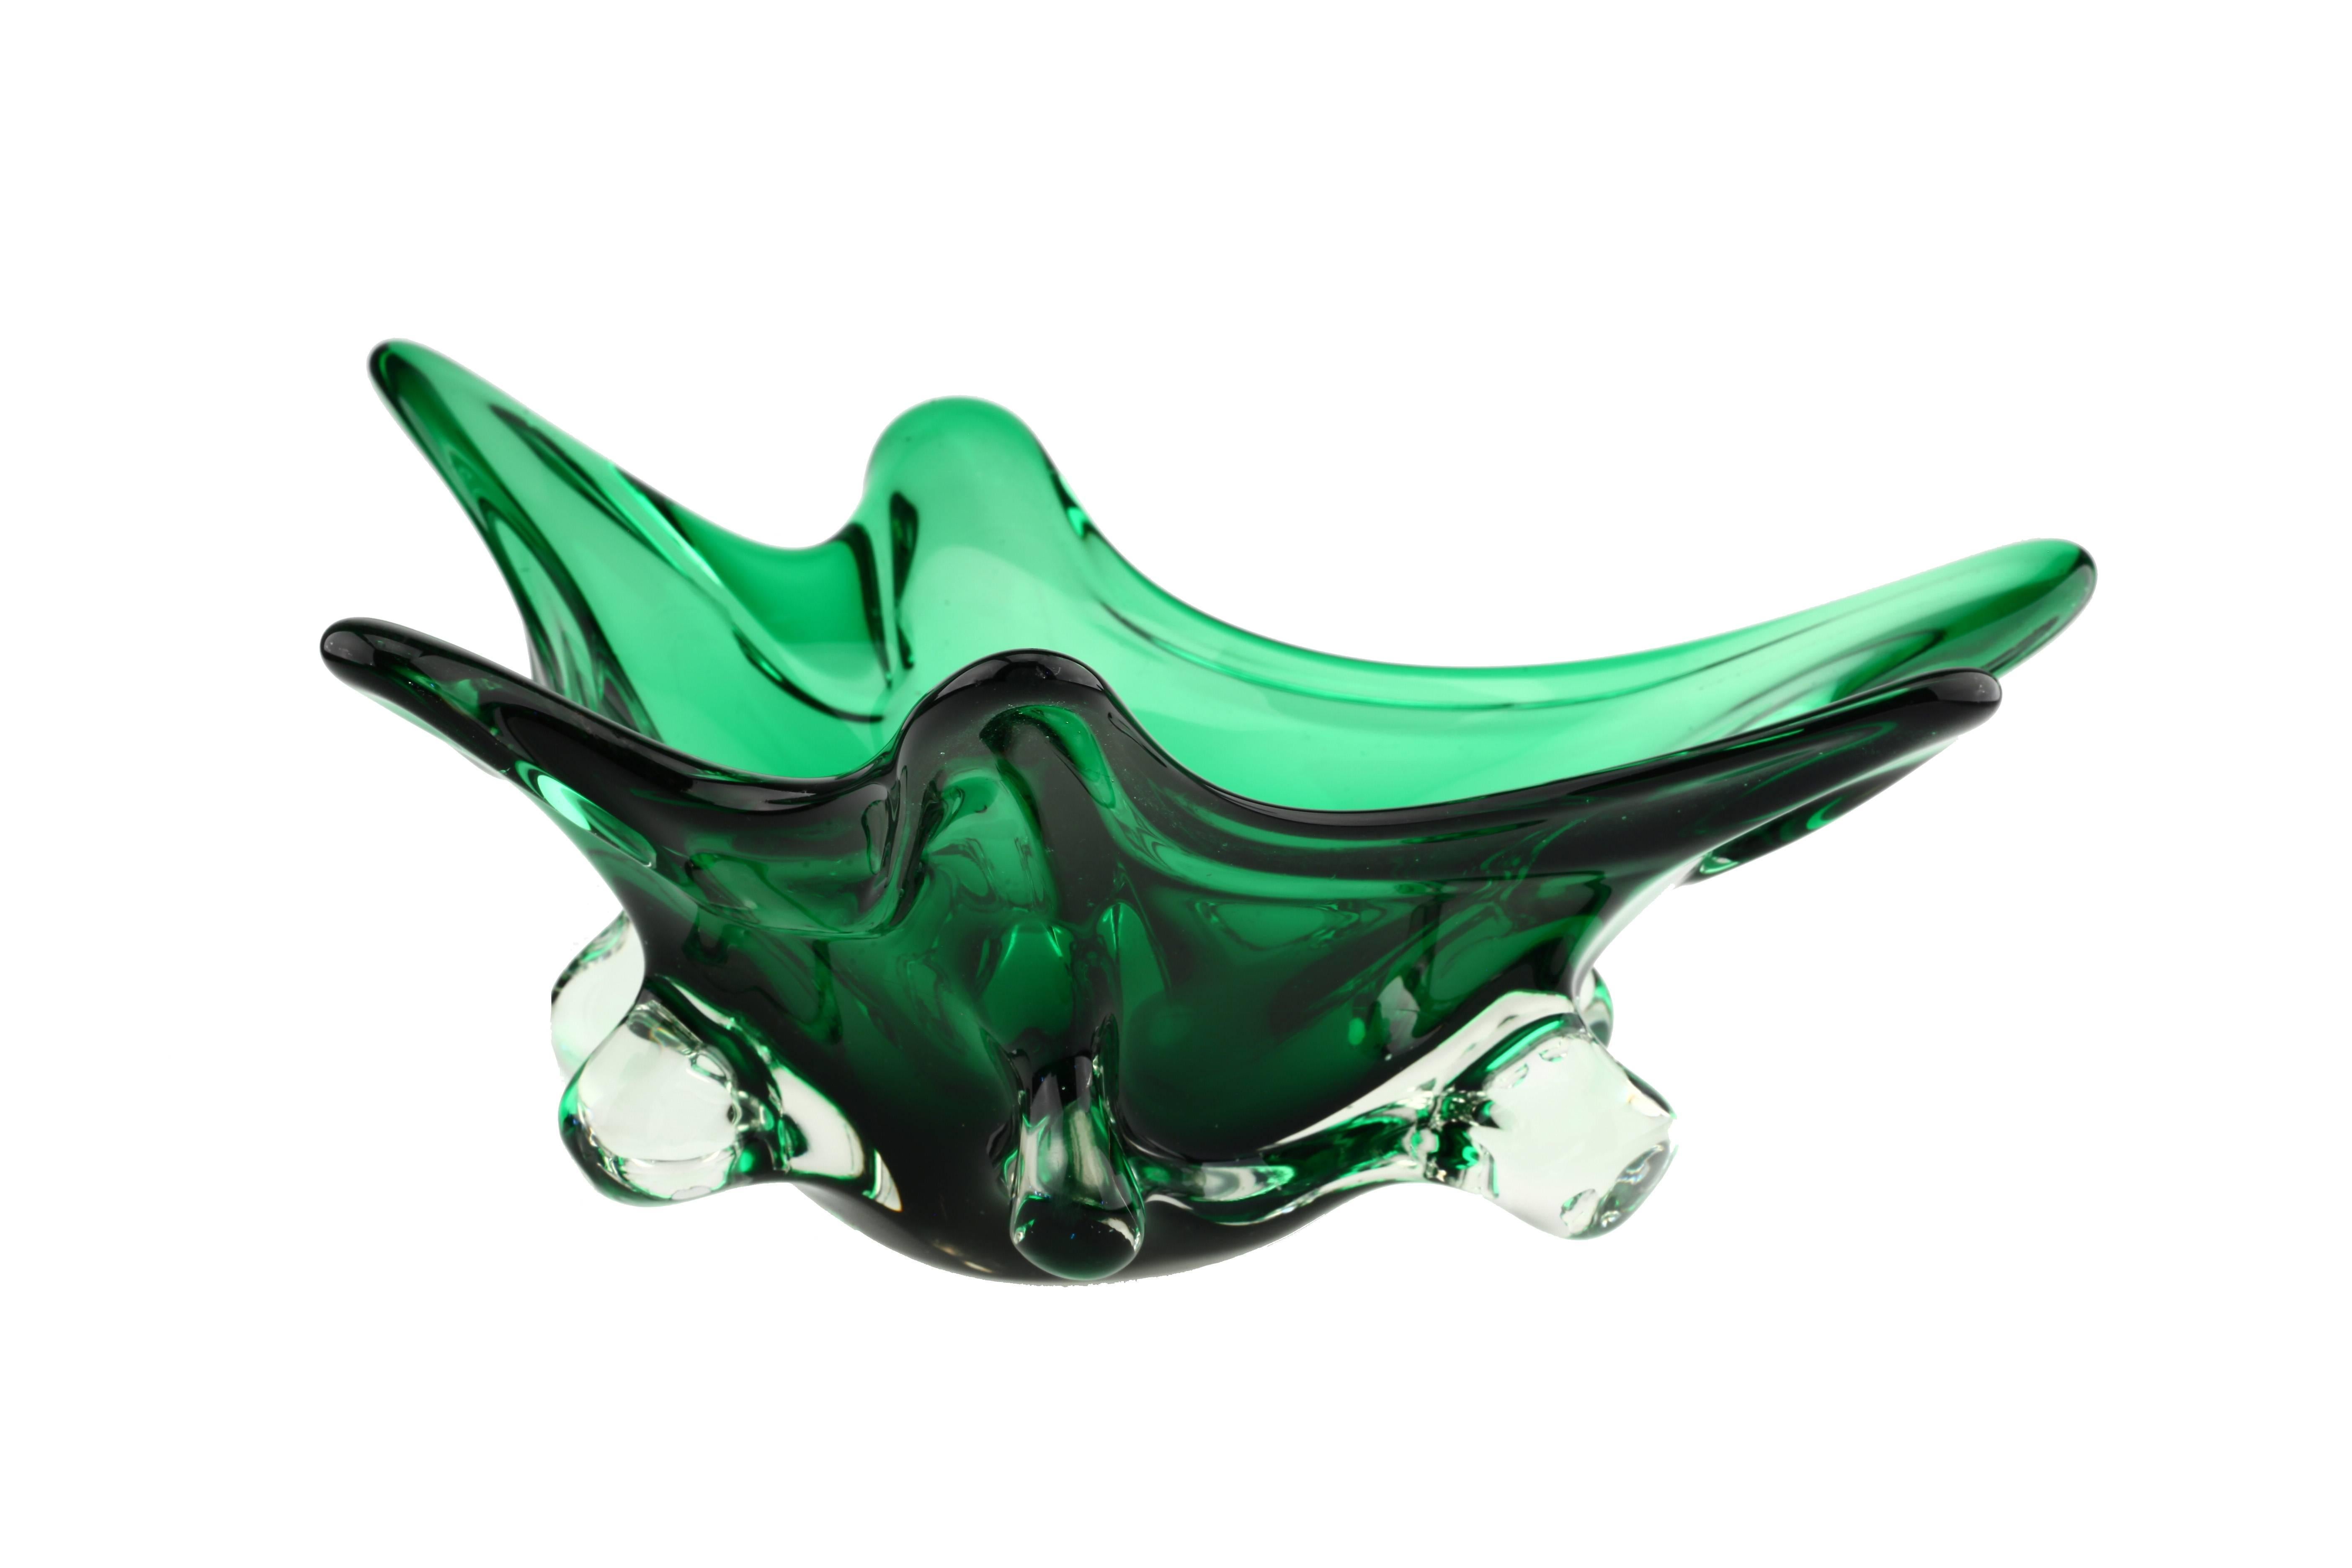 Murano Sommerso Genuine Venetian glass, 1960s-1970s green and clear glass. Pulled design vase-bowl. Made in Italy.

Height: 14.5 cm / 5.7 inch,
Width: 37 cm / 14.6 inch,
Depth: 36 cm / 14.2 inch.

It is in an very good condition. (Please do